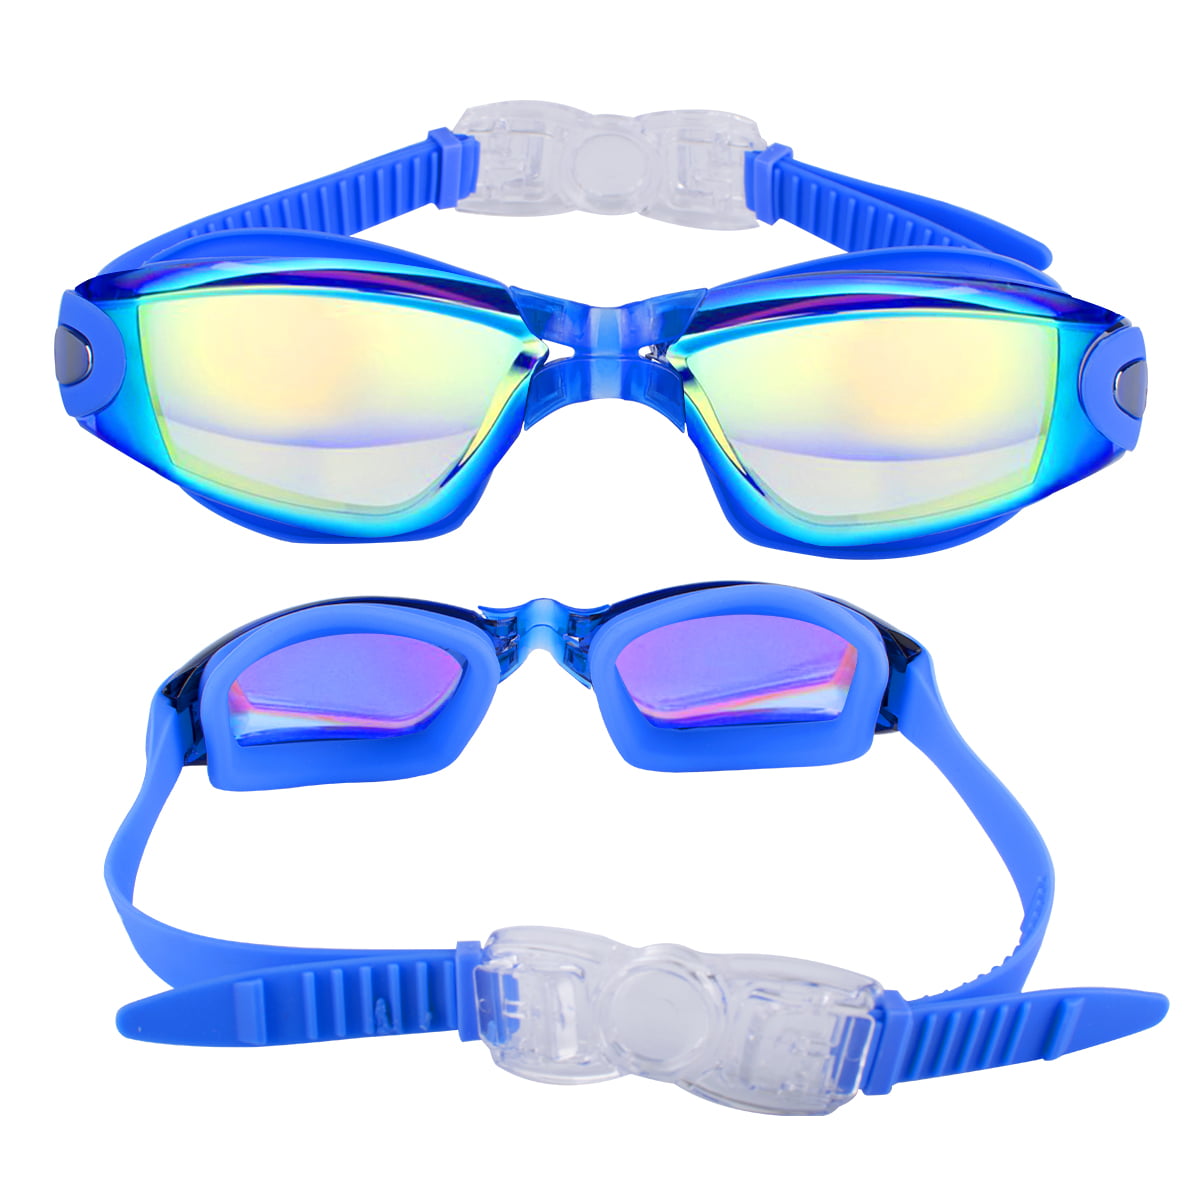 Details about   Mirror Swimming Goggles Anti-Fog UV Protection with Ear Plug Adult Swim Glasses 